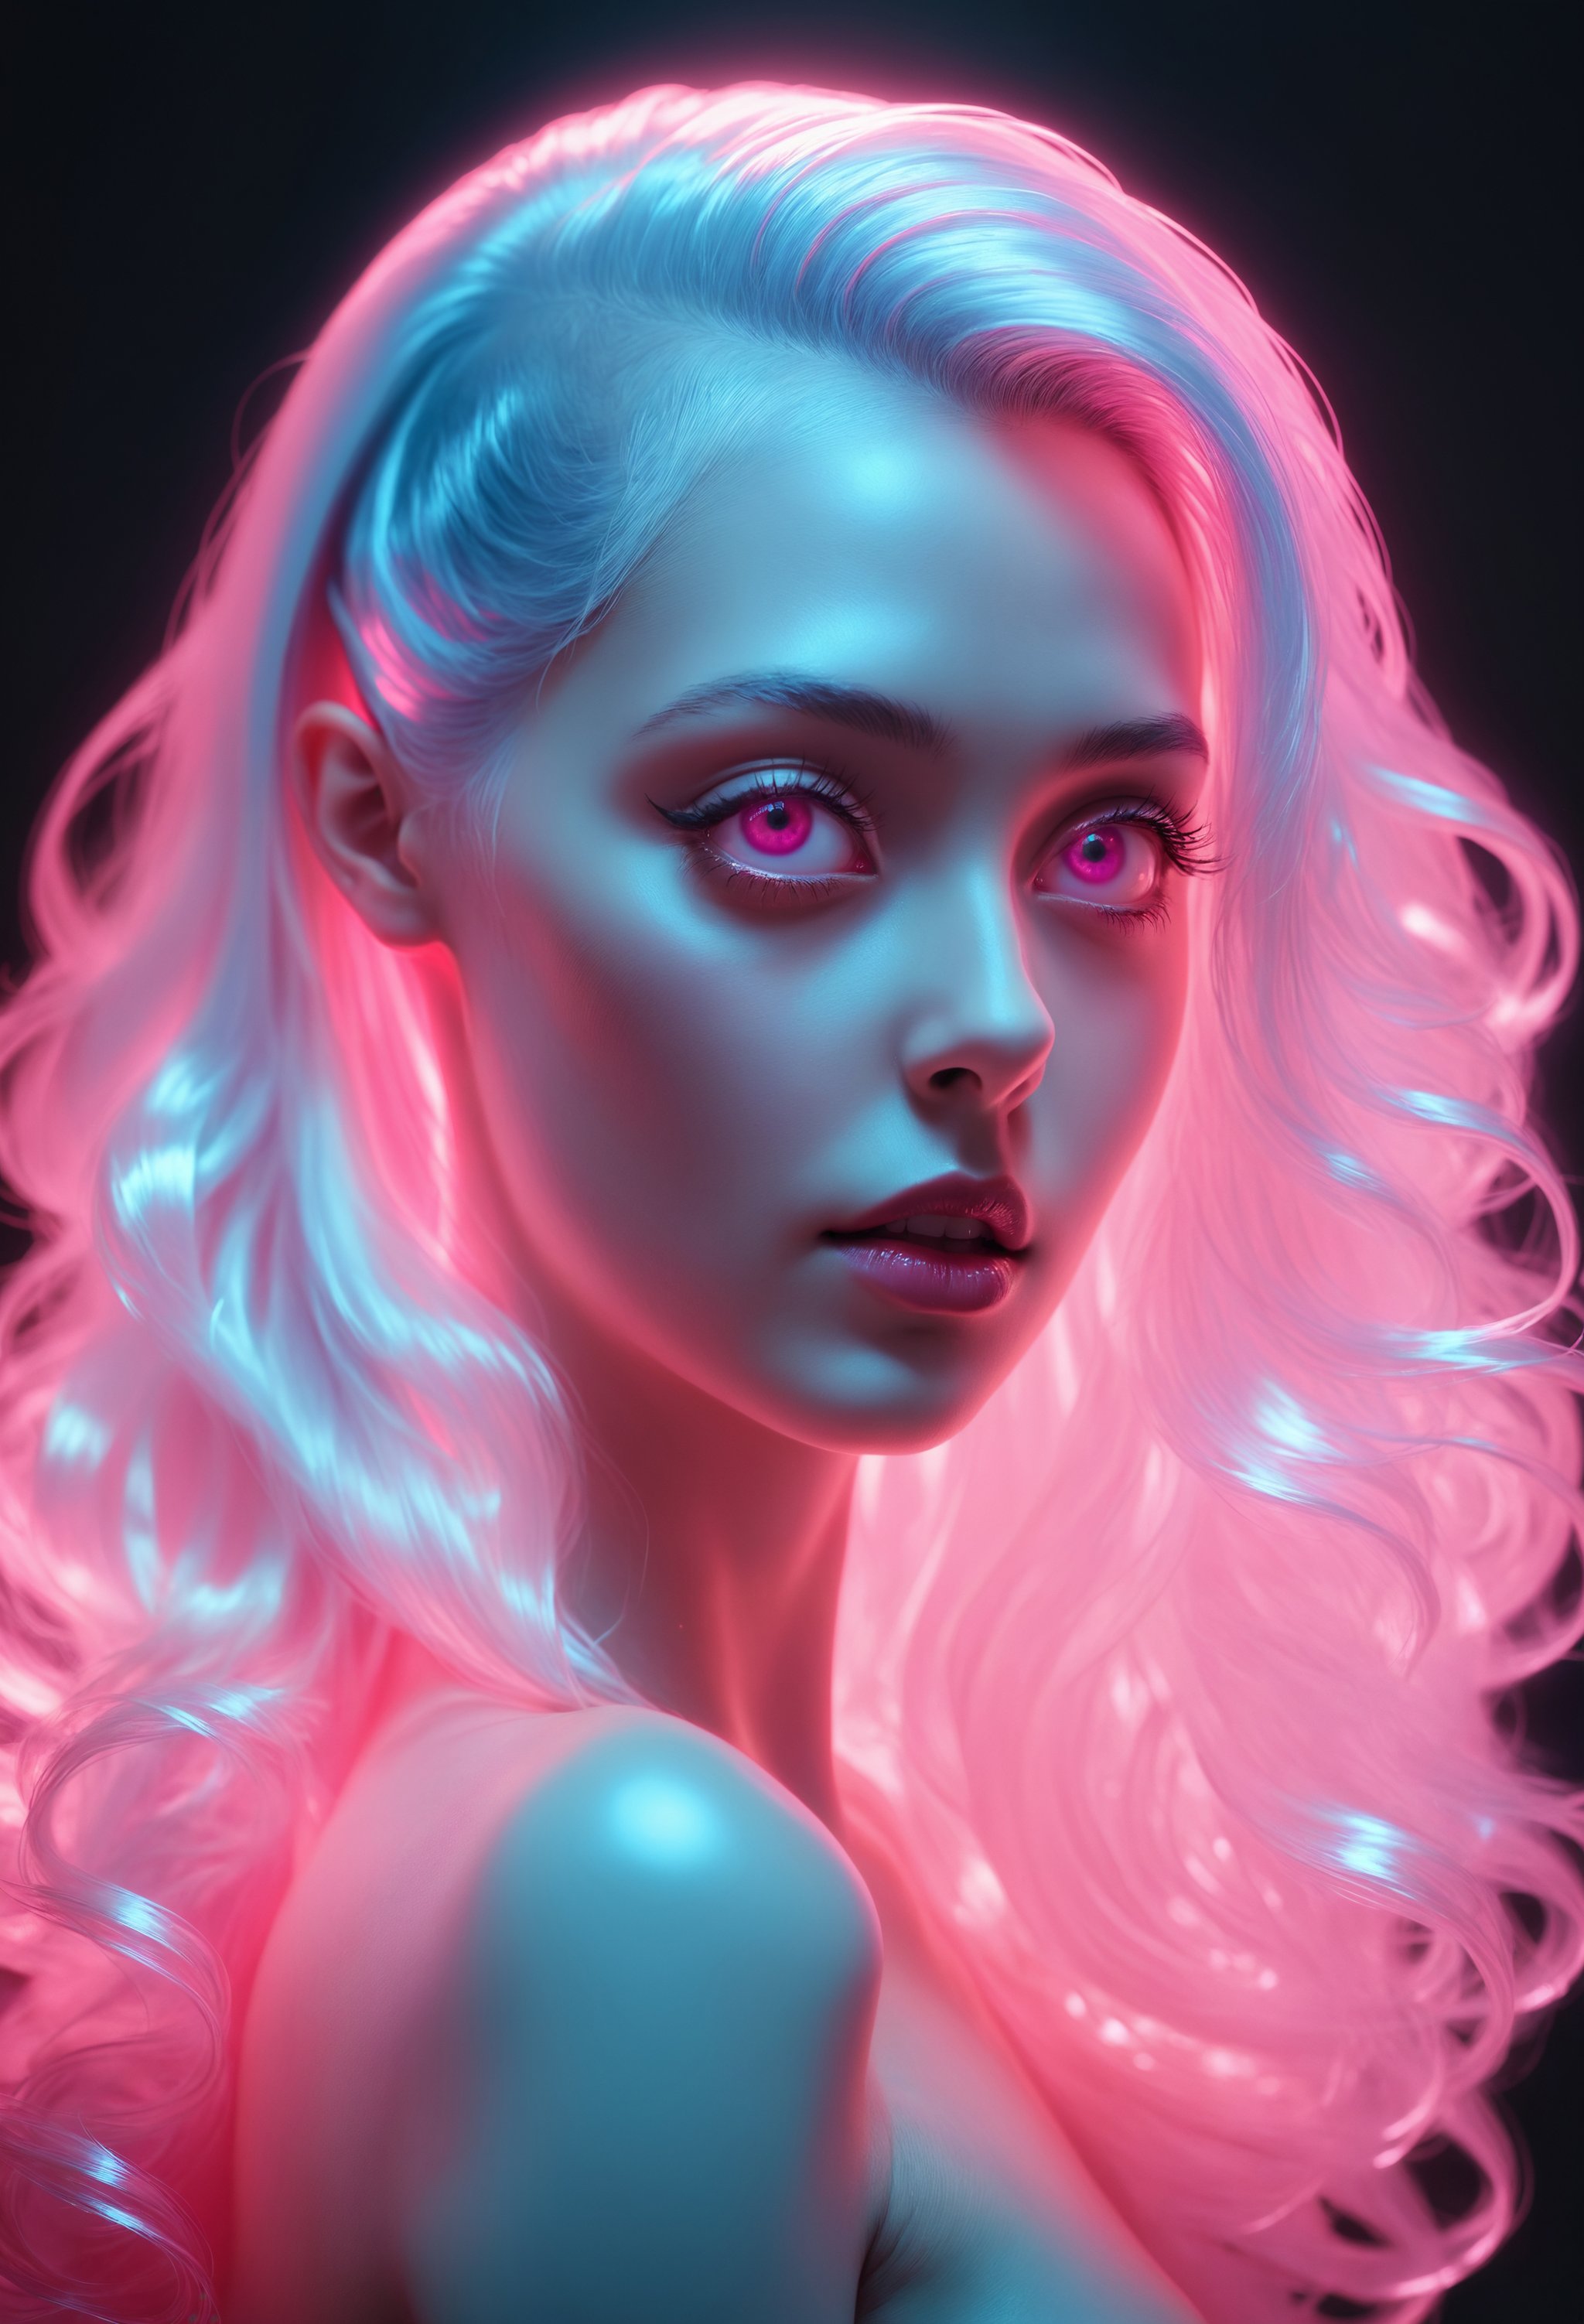 zavy-hrglw, neon pink hair, hyperrealistic style portrait of an otherworldly being with metallic skin, translucent, ghostly, transparent, opalescent, expression of feelings, imaginative, highly detailed, magnificent, celestial, ethereal, epic, magical, dreamy, chiaroscuro, atmospheric lighting, clean,